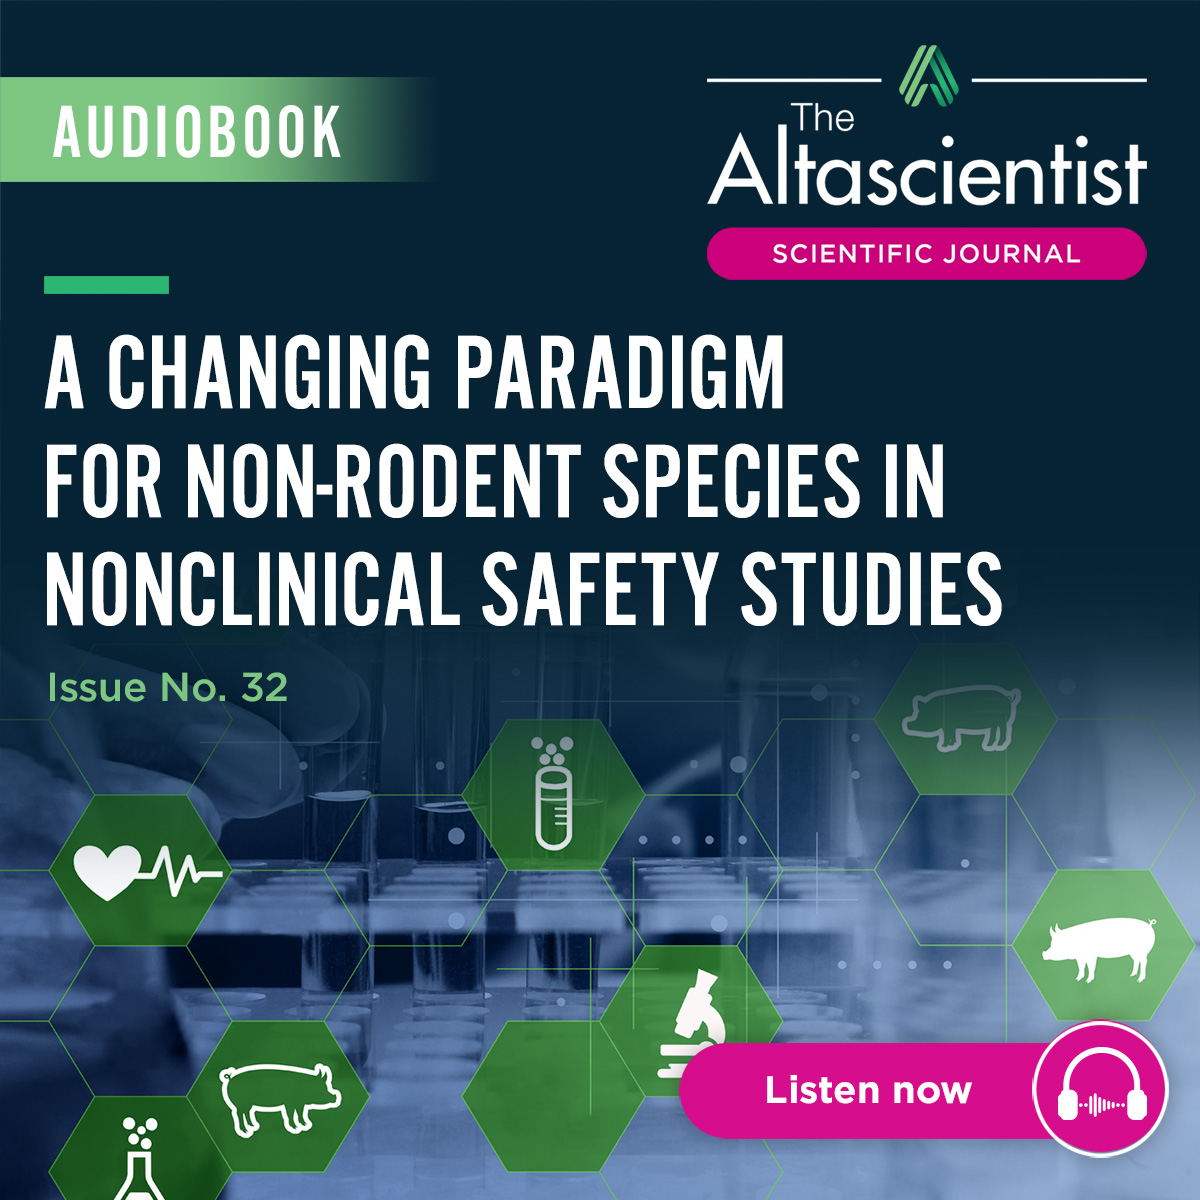 A Changing Paradigm for Non-rodent Species in Nonclinical Safety Studies